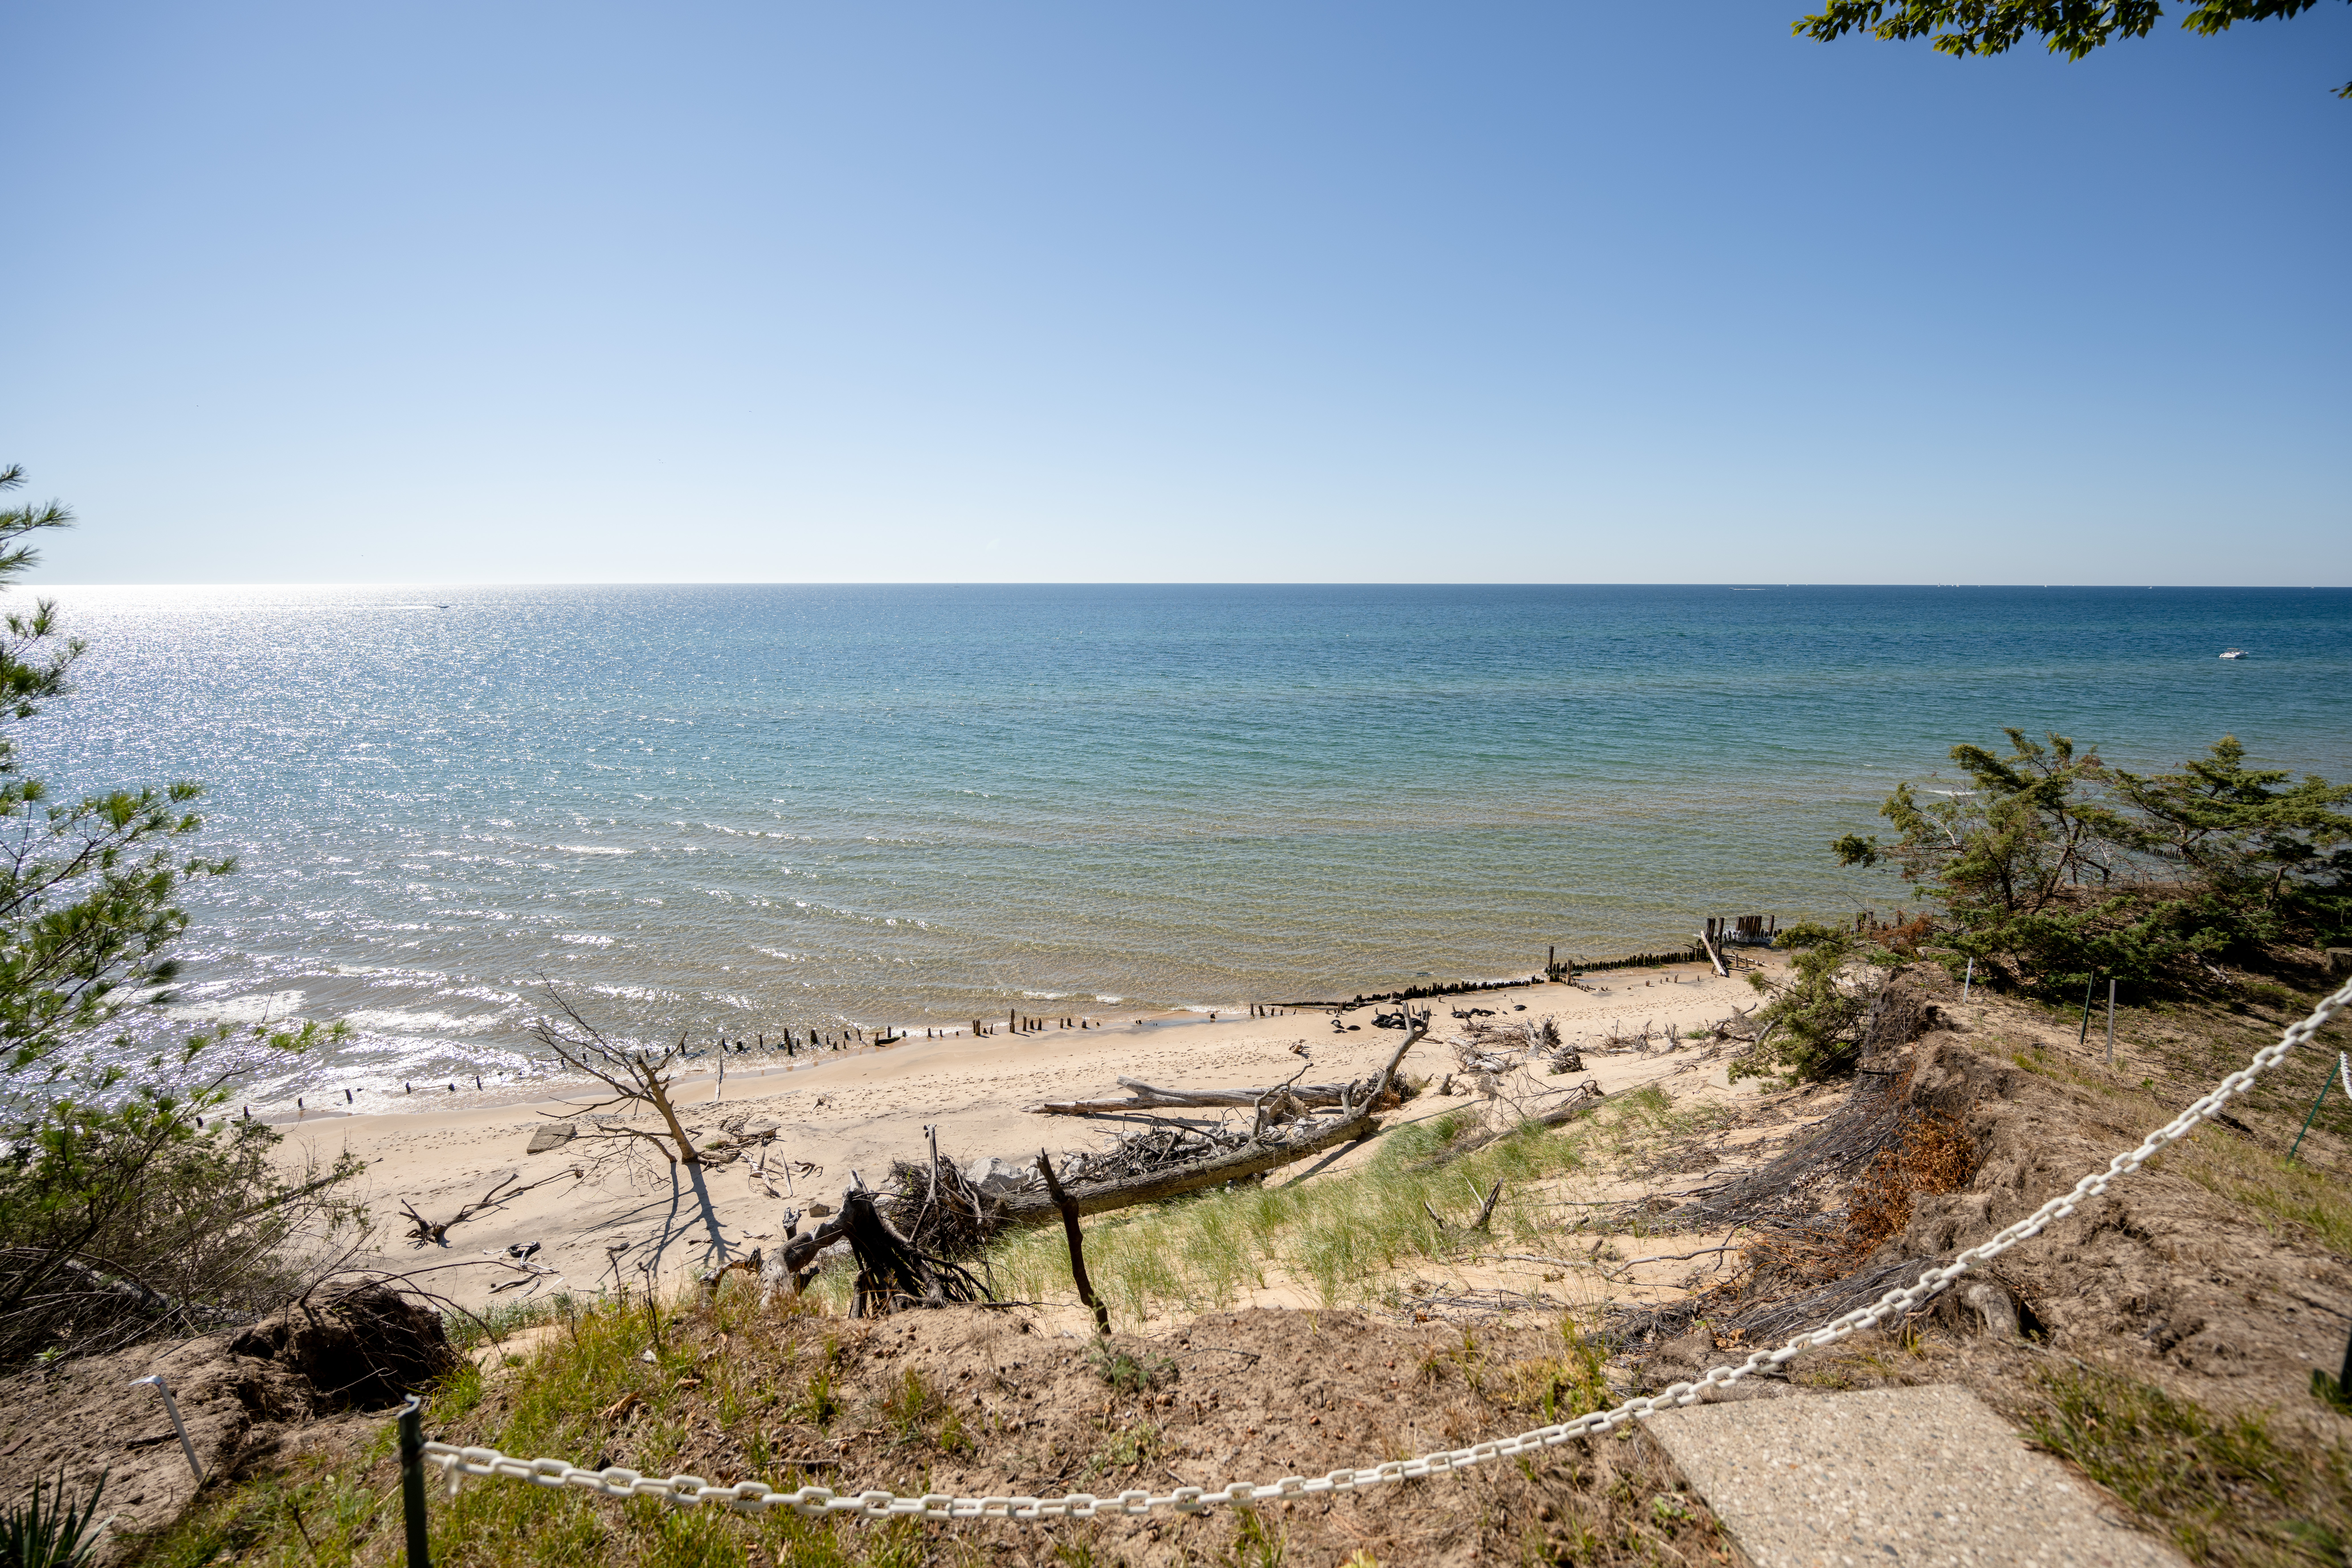 Please note that Lake Michigan water levels are ever-changing, beach size can vary from day-to-day.